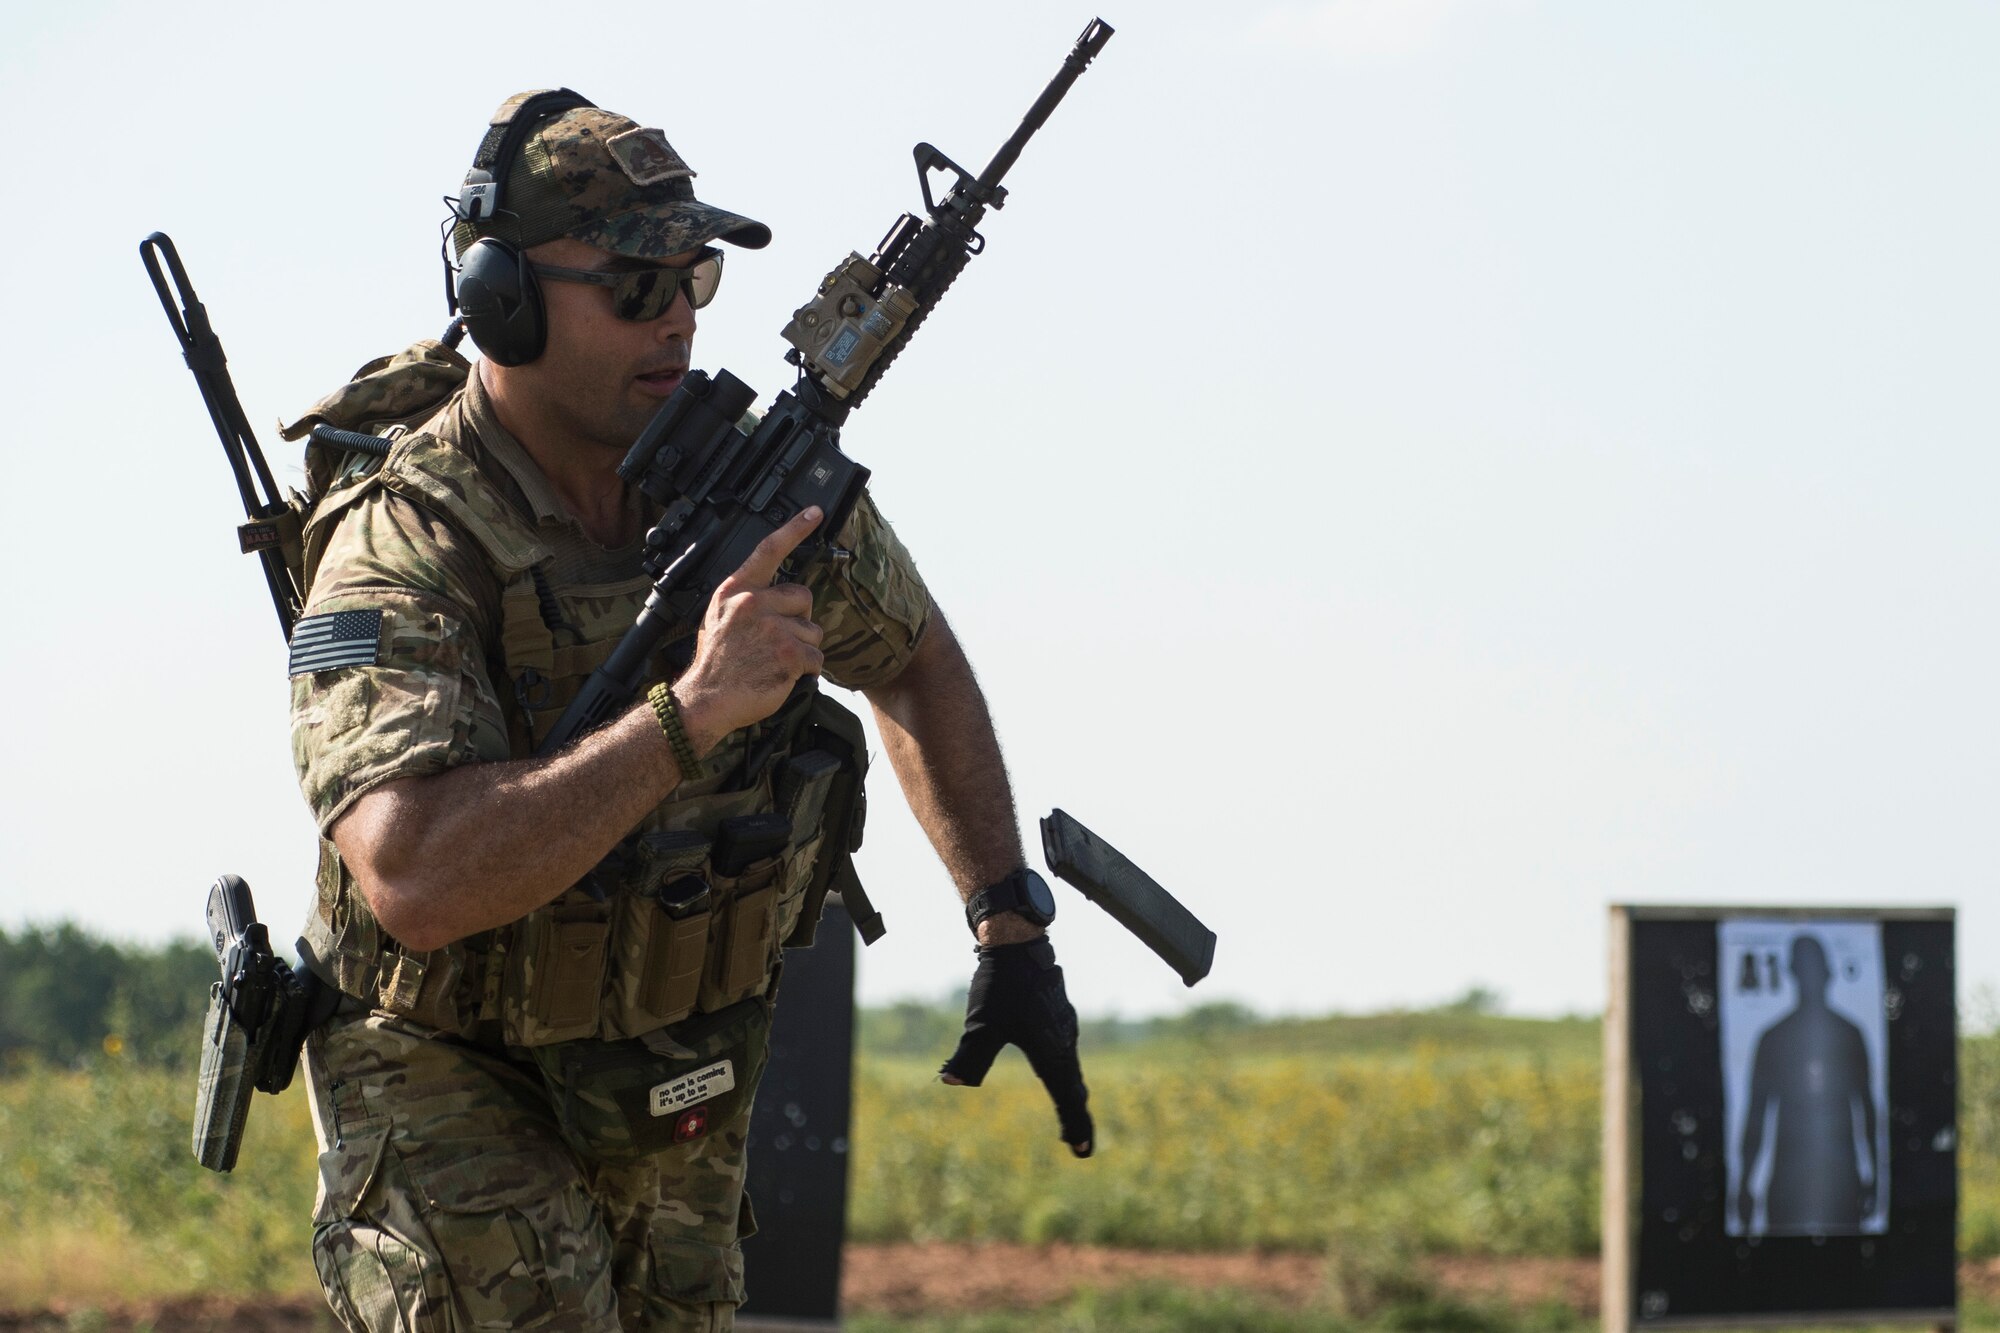 A student reloads an M4 carbine during a full spectrum operator course, Aug. 28, 2018, at Smoky Hill Air National Guard Range, Kan. The course was held Aug. 26-31, and incorporated specific duties performed by tactical air control party members and security forces personnel to build on their gunfighting skills. (U.S. Air Force photo by Senior Airman Janiqua P. Robinson)